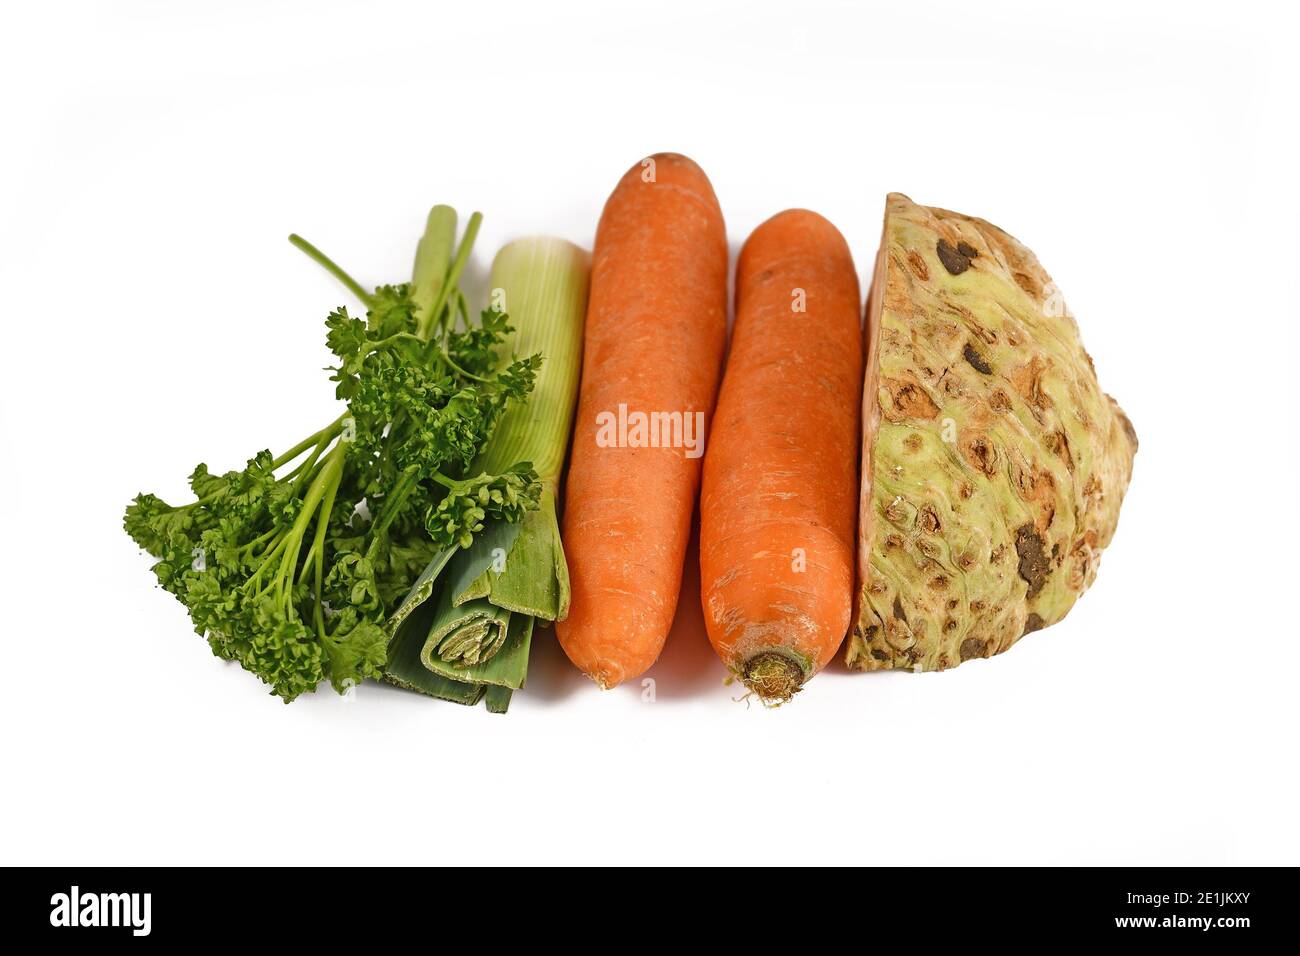 Bunch of soup vegetables containing carrots, leeks, parsley and celery root isolated on white background. Traditionally sold in bundlesin germany Stock Photo